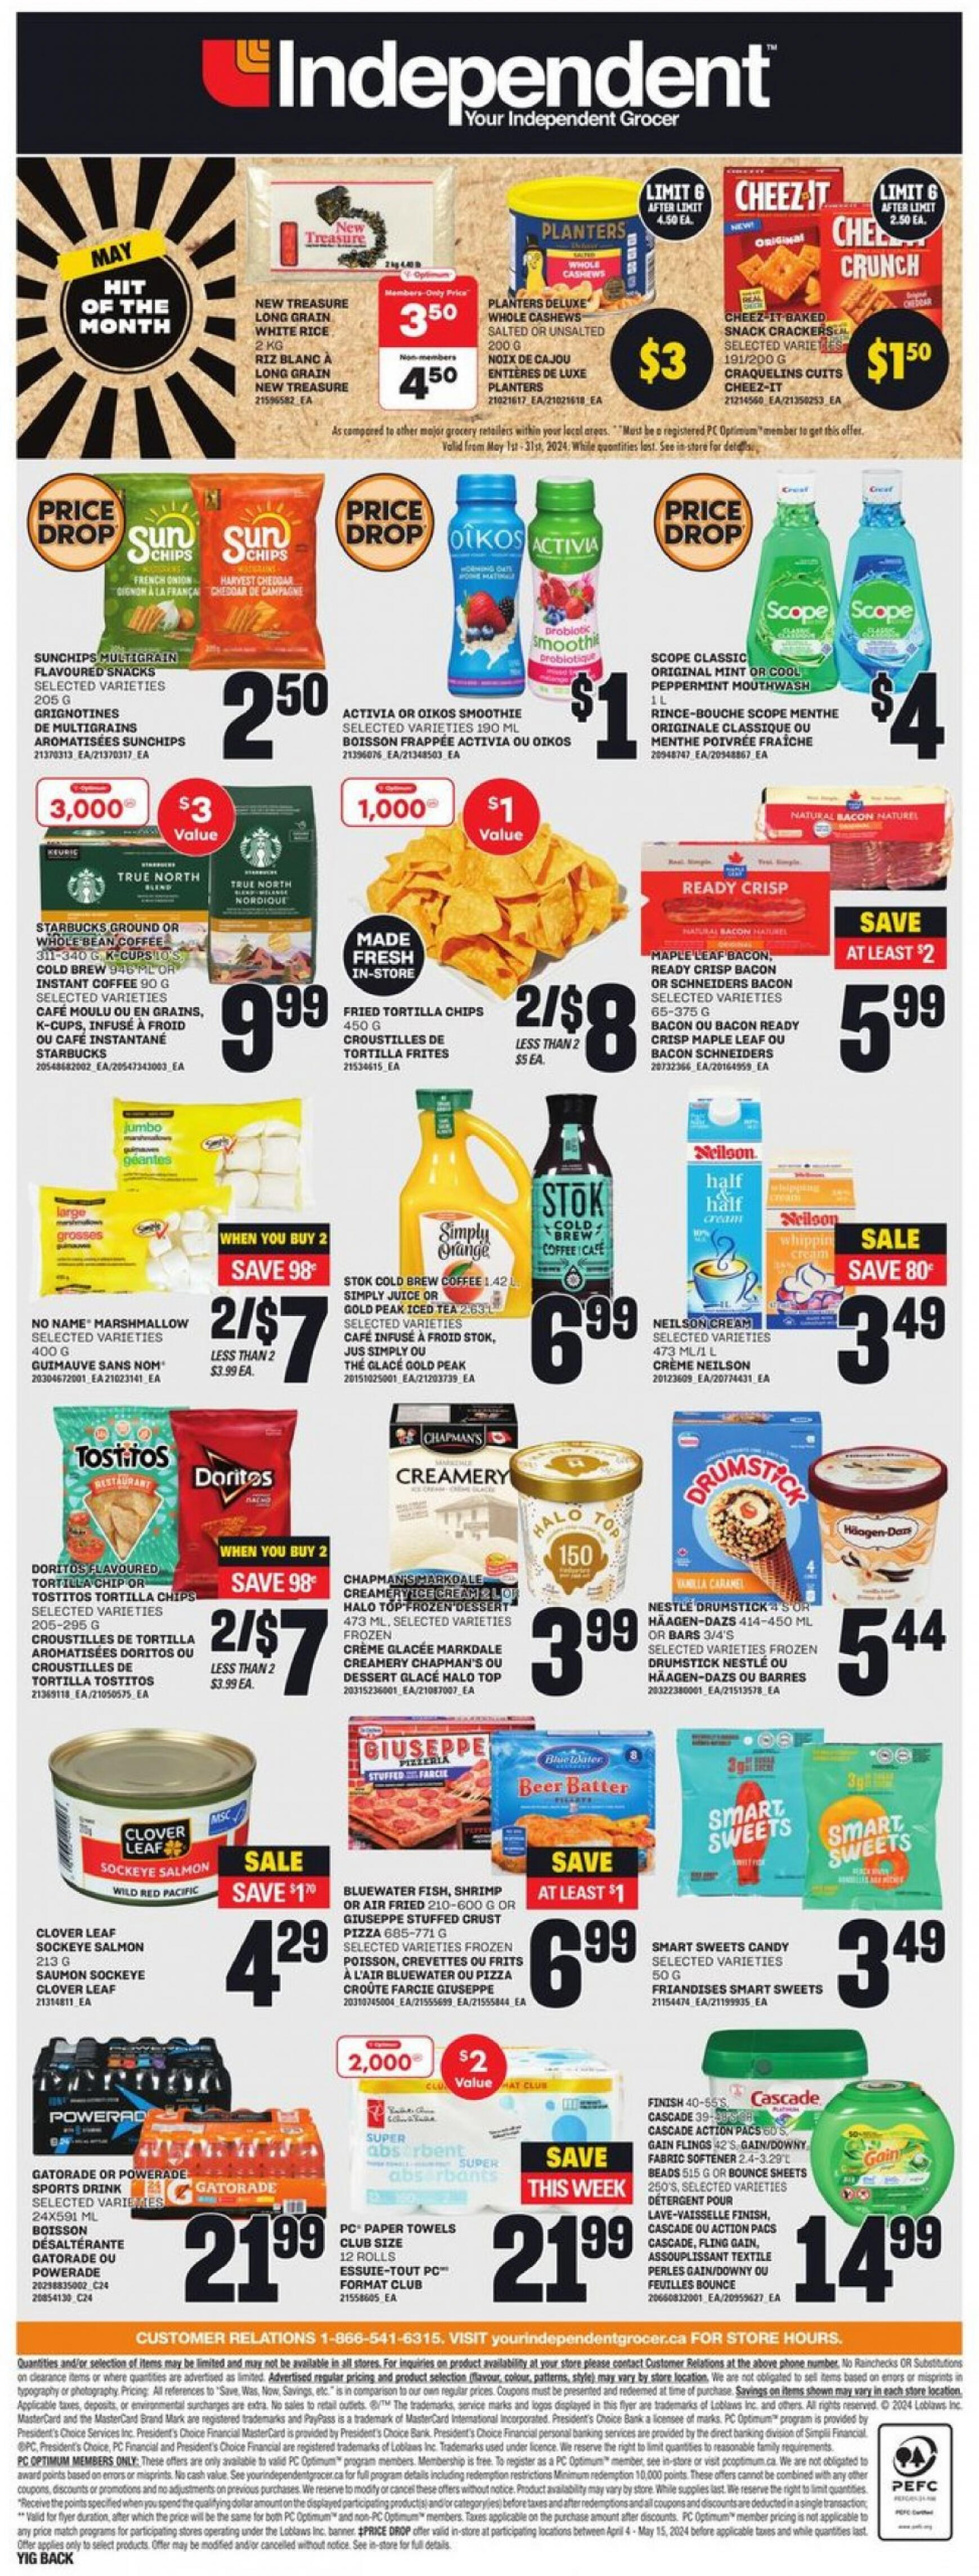 independent-grocery - Independent Grocery flyer current 09.05. - 15.05. - page: 6